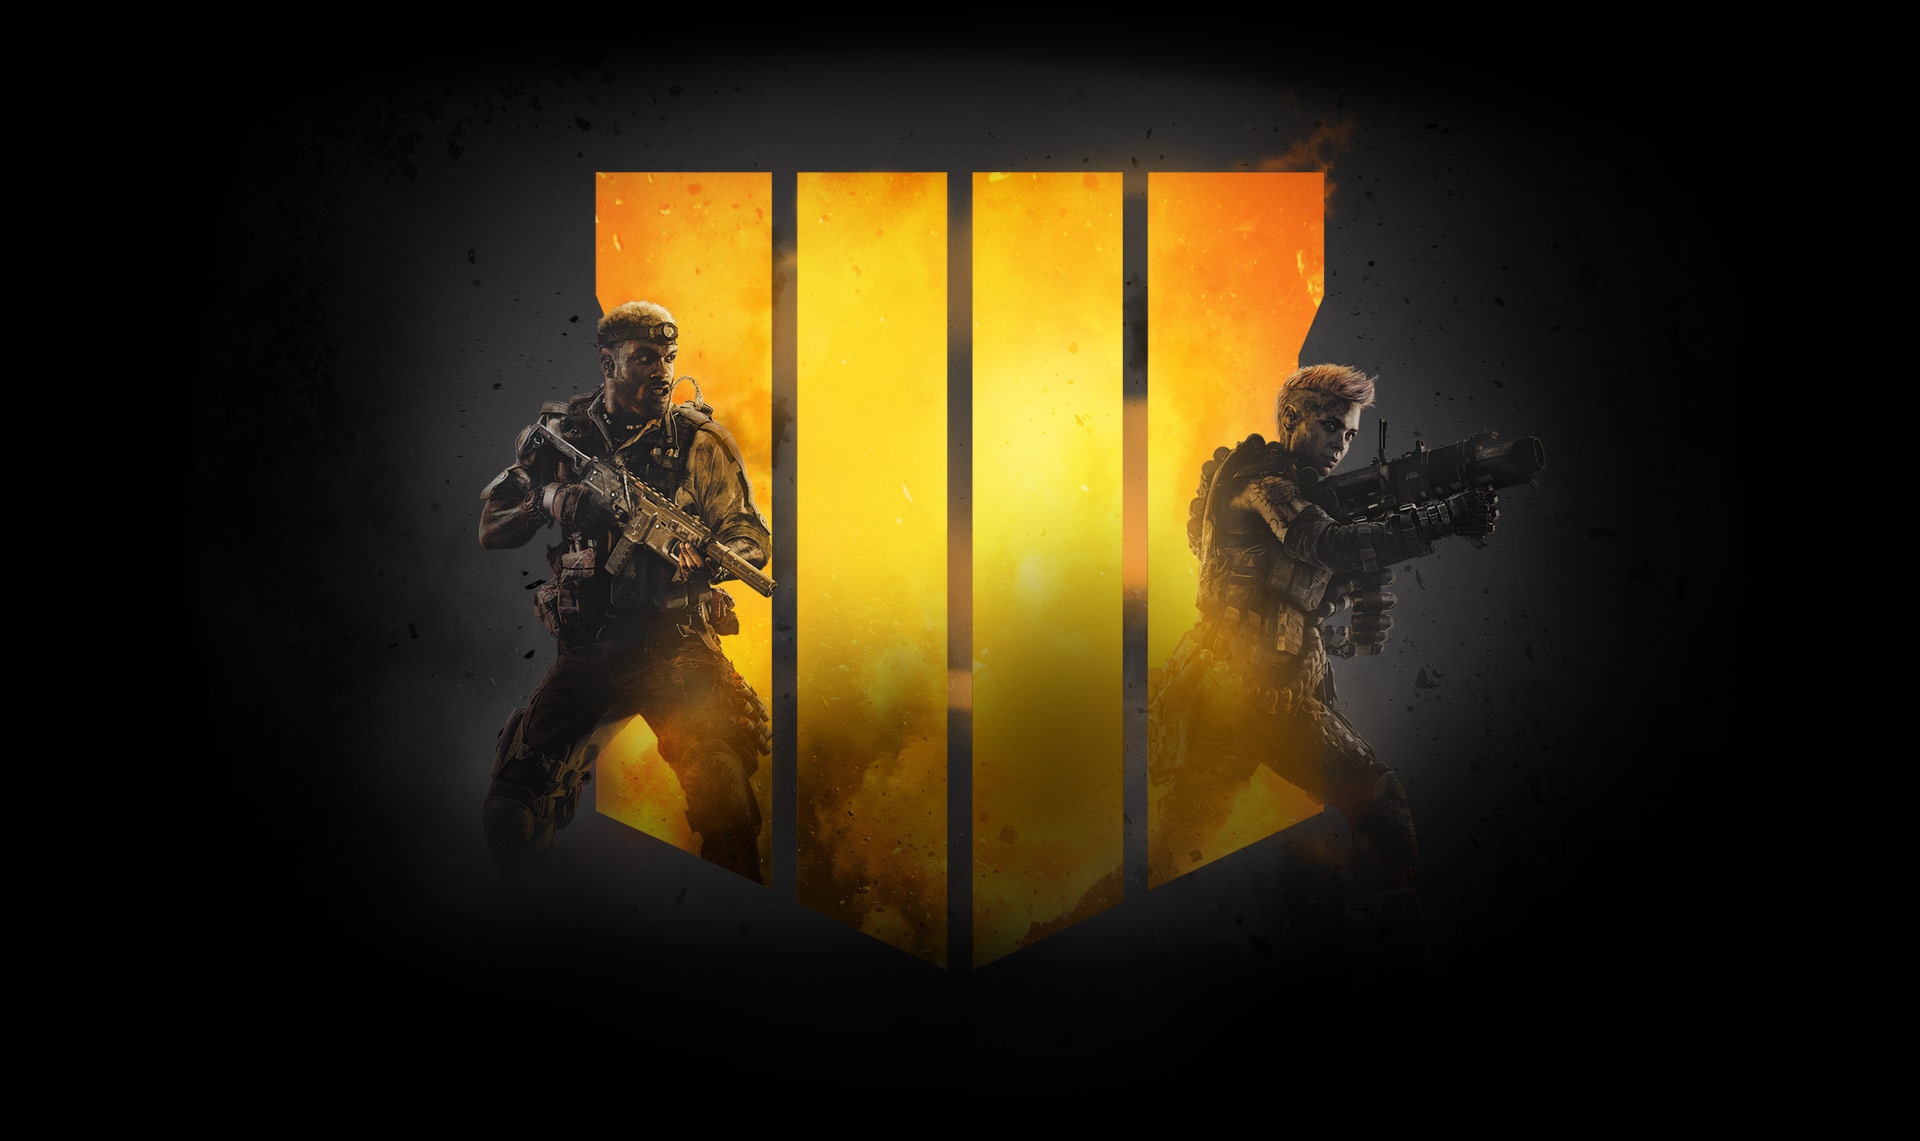 blackout wallpaper,yellow,soldier,games,digital compositing,graphics